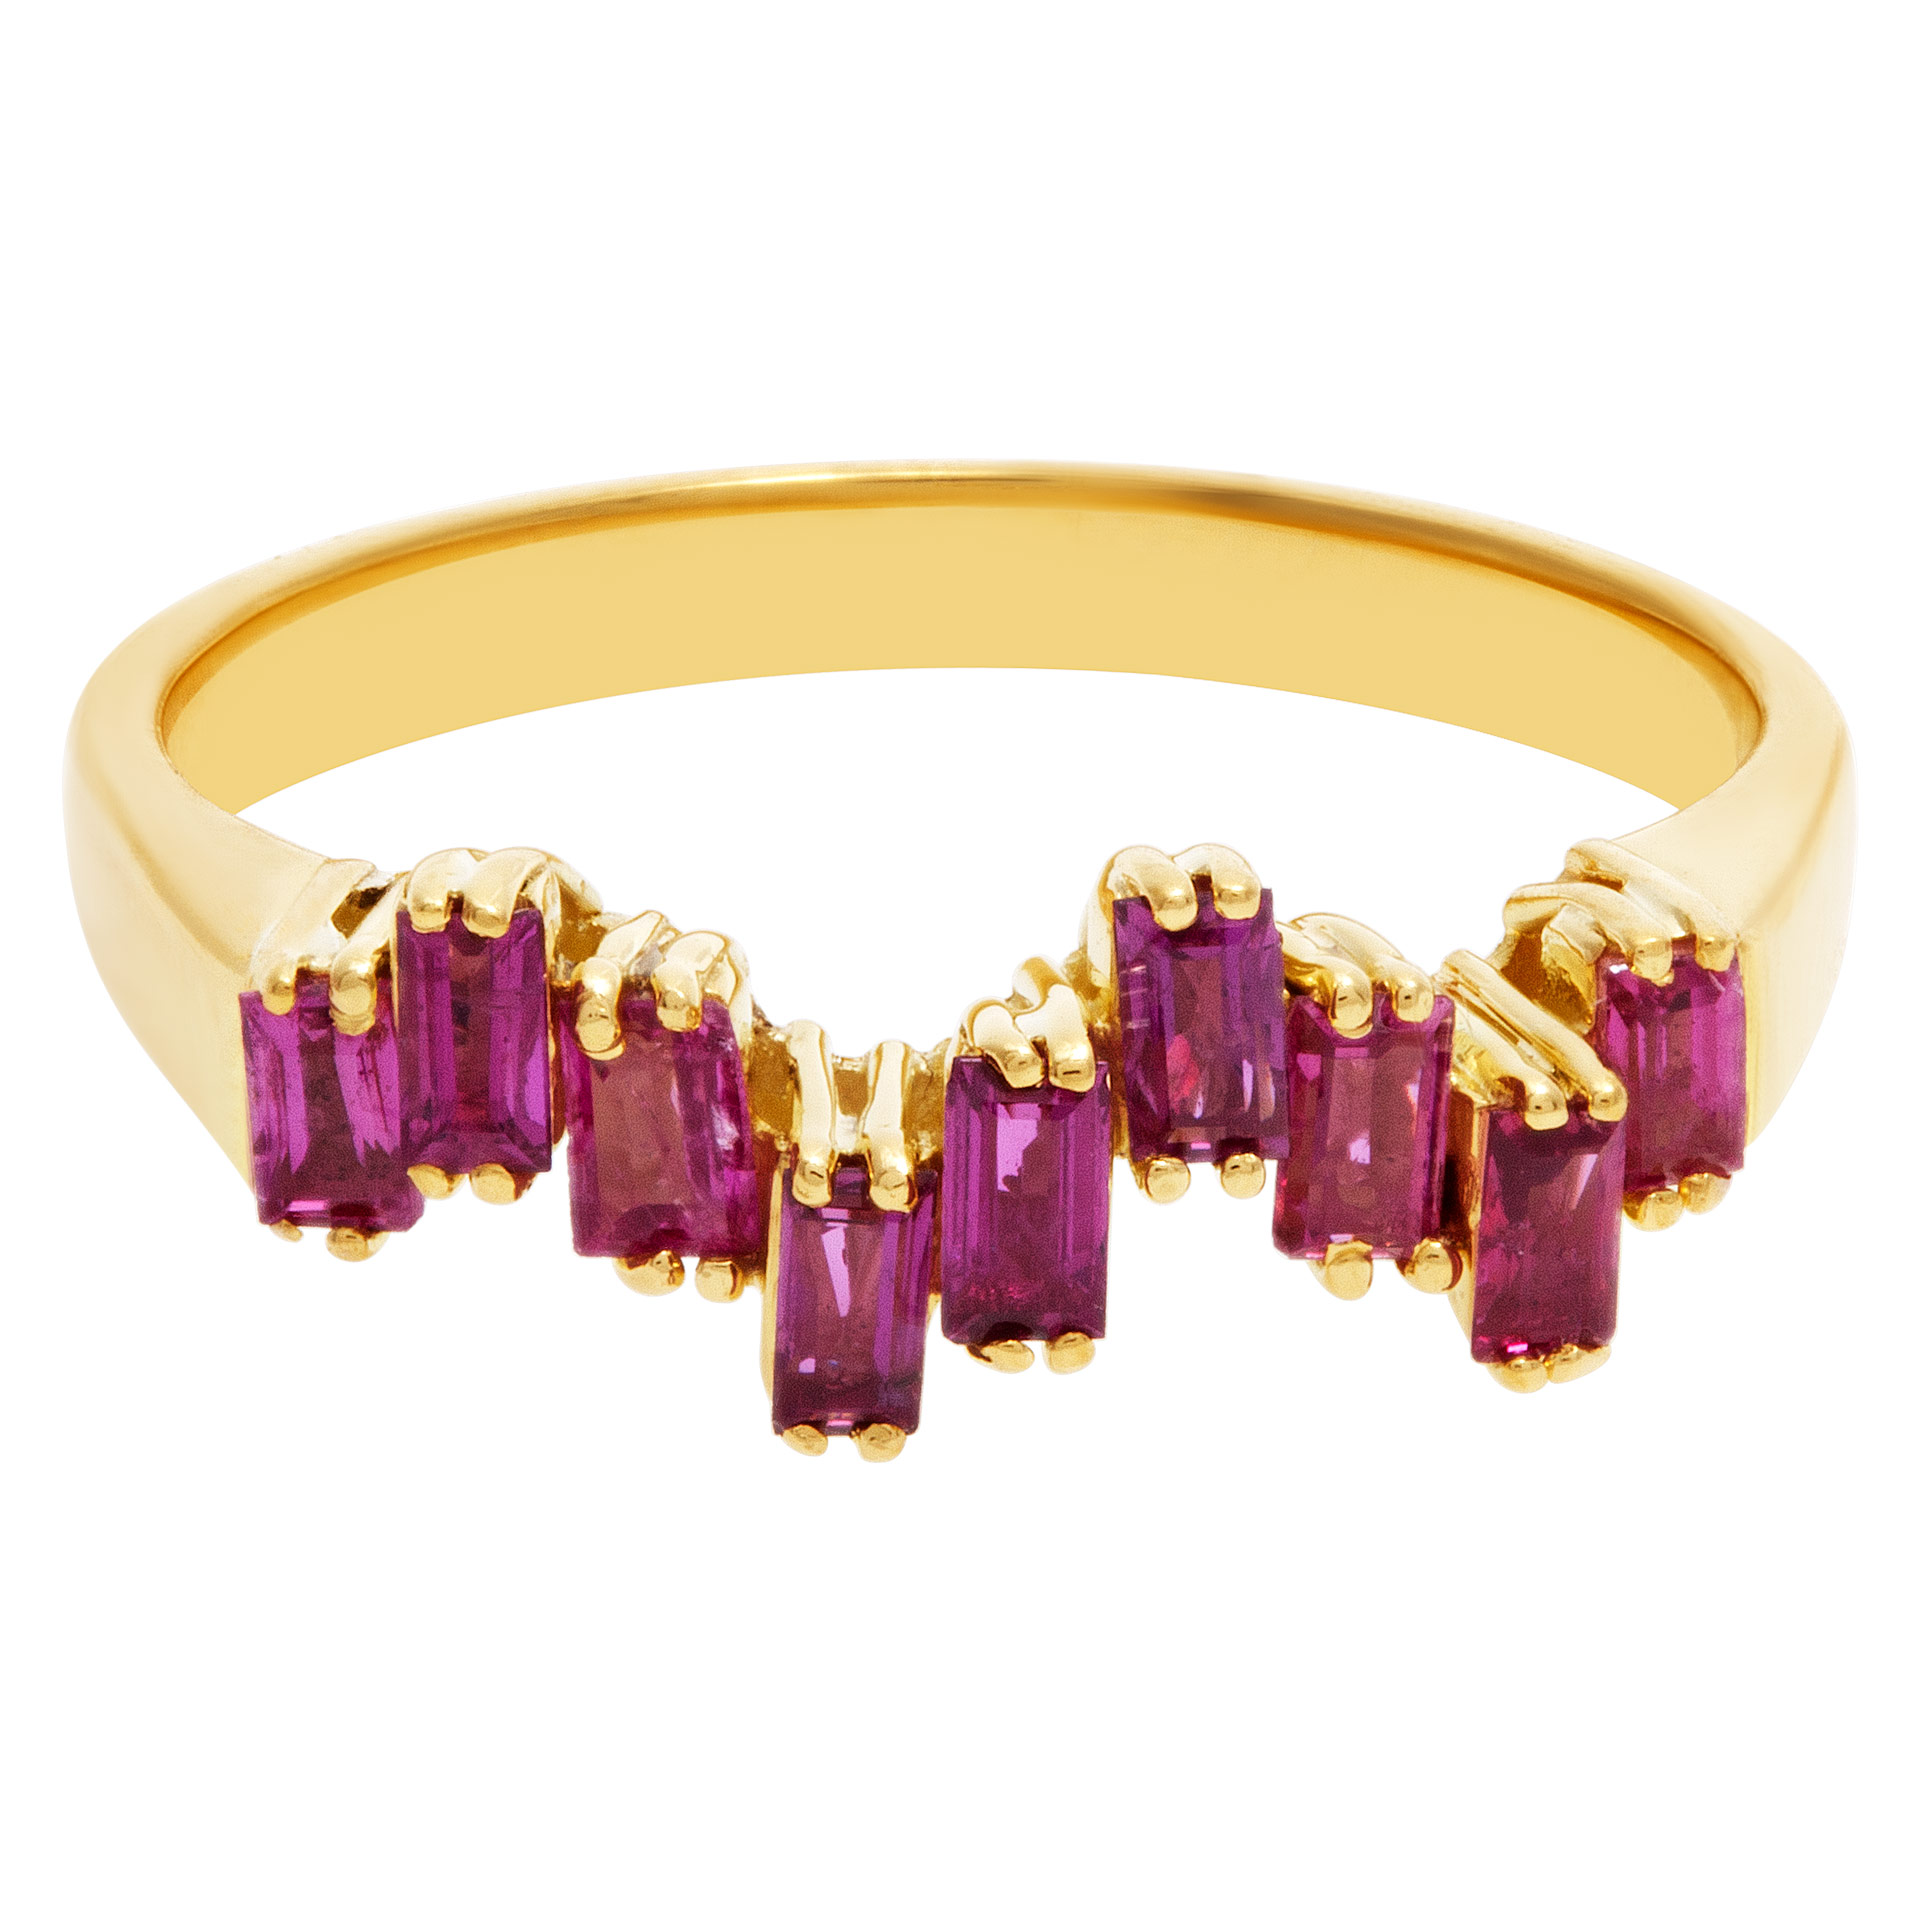 Modern ring with ruby accents in 18k gold